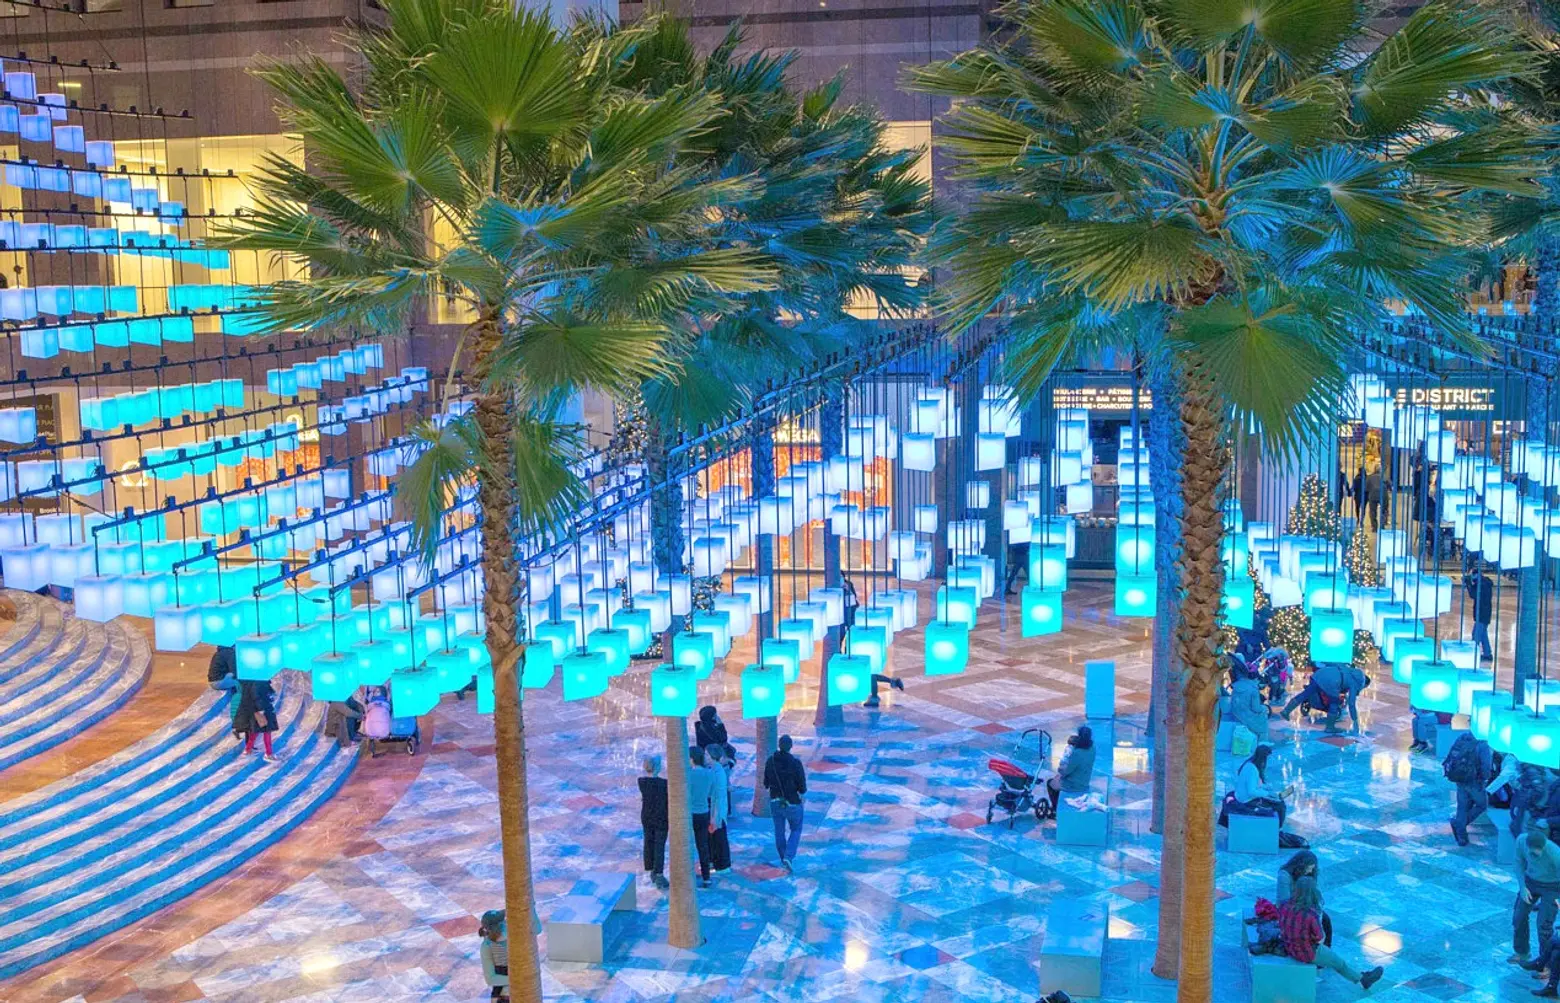 Luminaries Brookfield Place, 200 Vesey Place